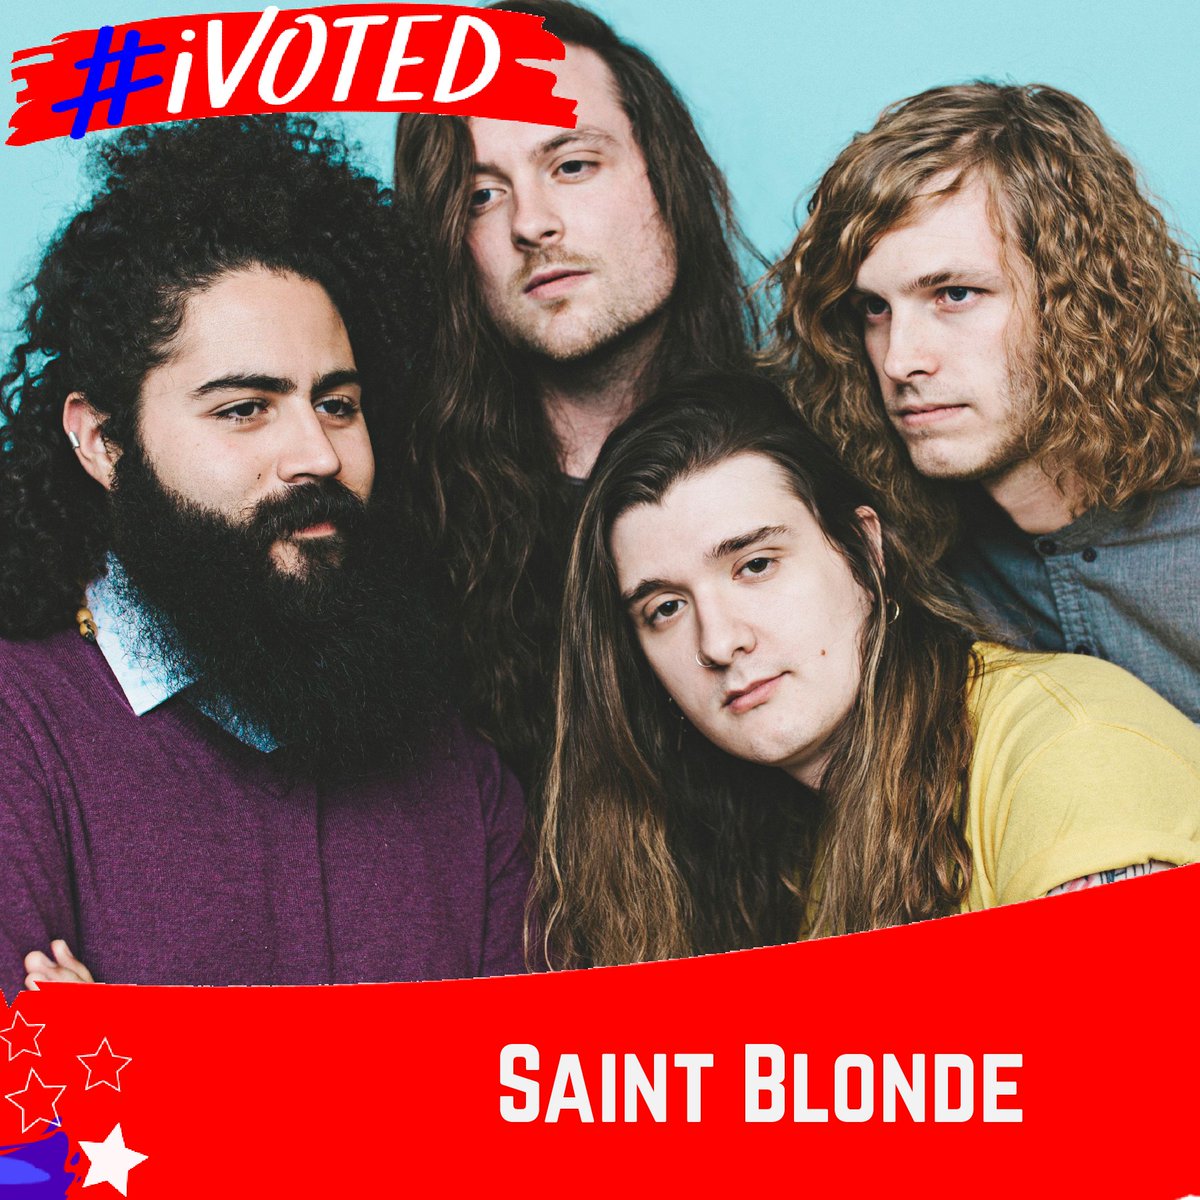 Next in our #IVoted spotlight is @saintblondetx! Saint Blonde takes influence from melding sincere indie pop flavors with the emotive, synth-laden sound of yesteryear. Take a #selfie outside of your polling station or w/ your blank mail-in ballot to watch them perform on Nov. 3!